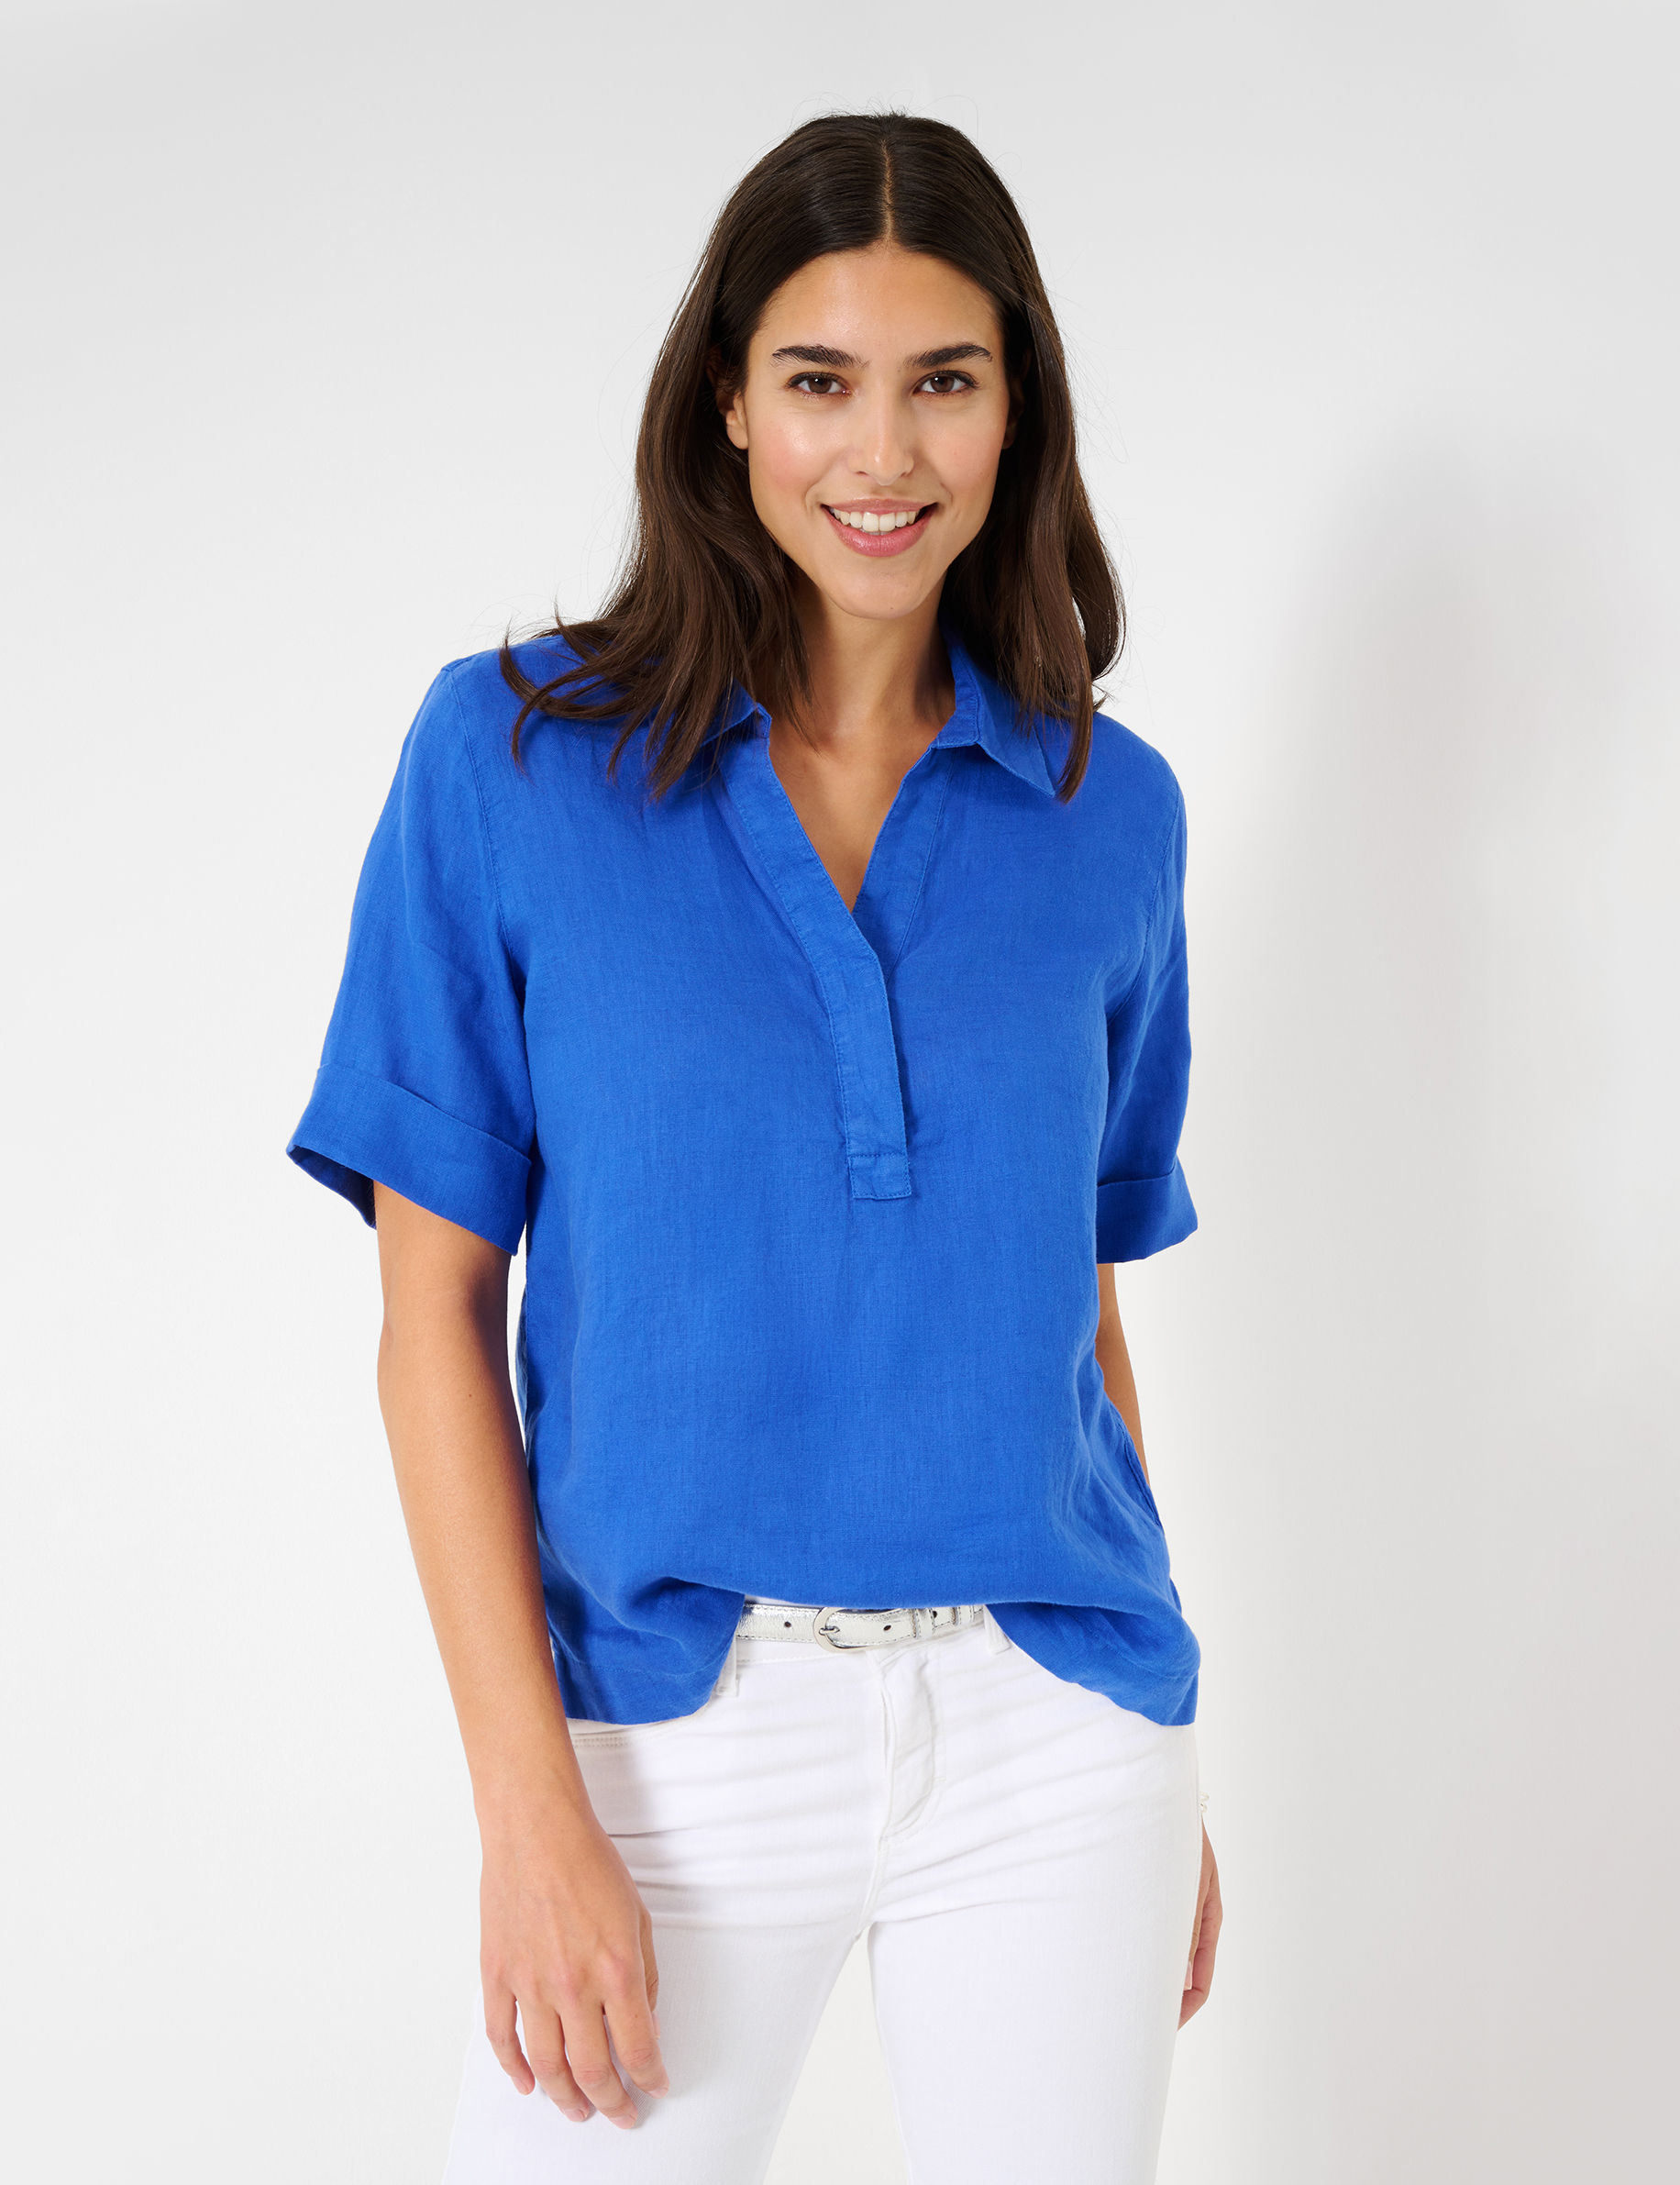 Shades of Blue, Women, Style VIO, MODEL_FRONT_ISHOP